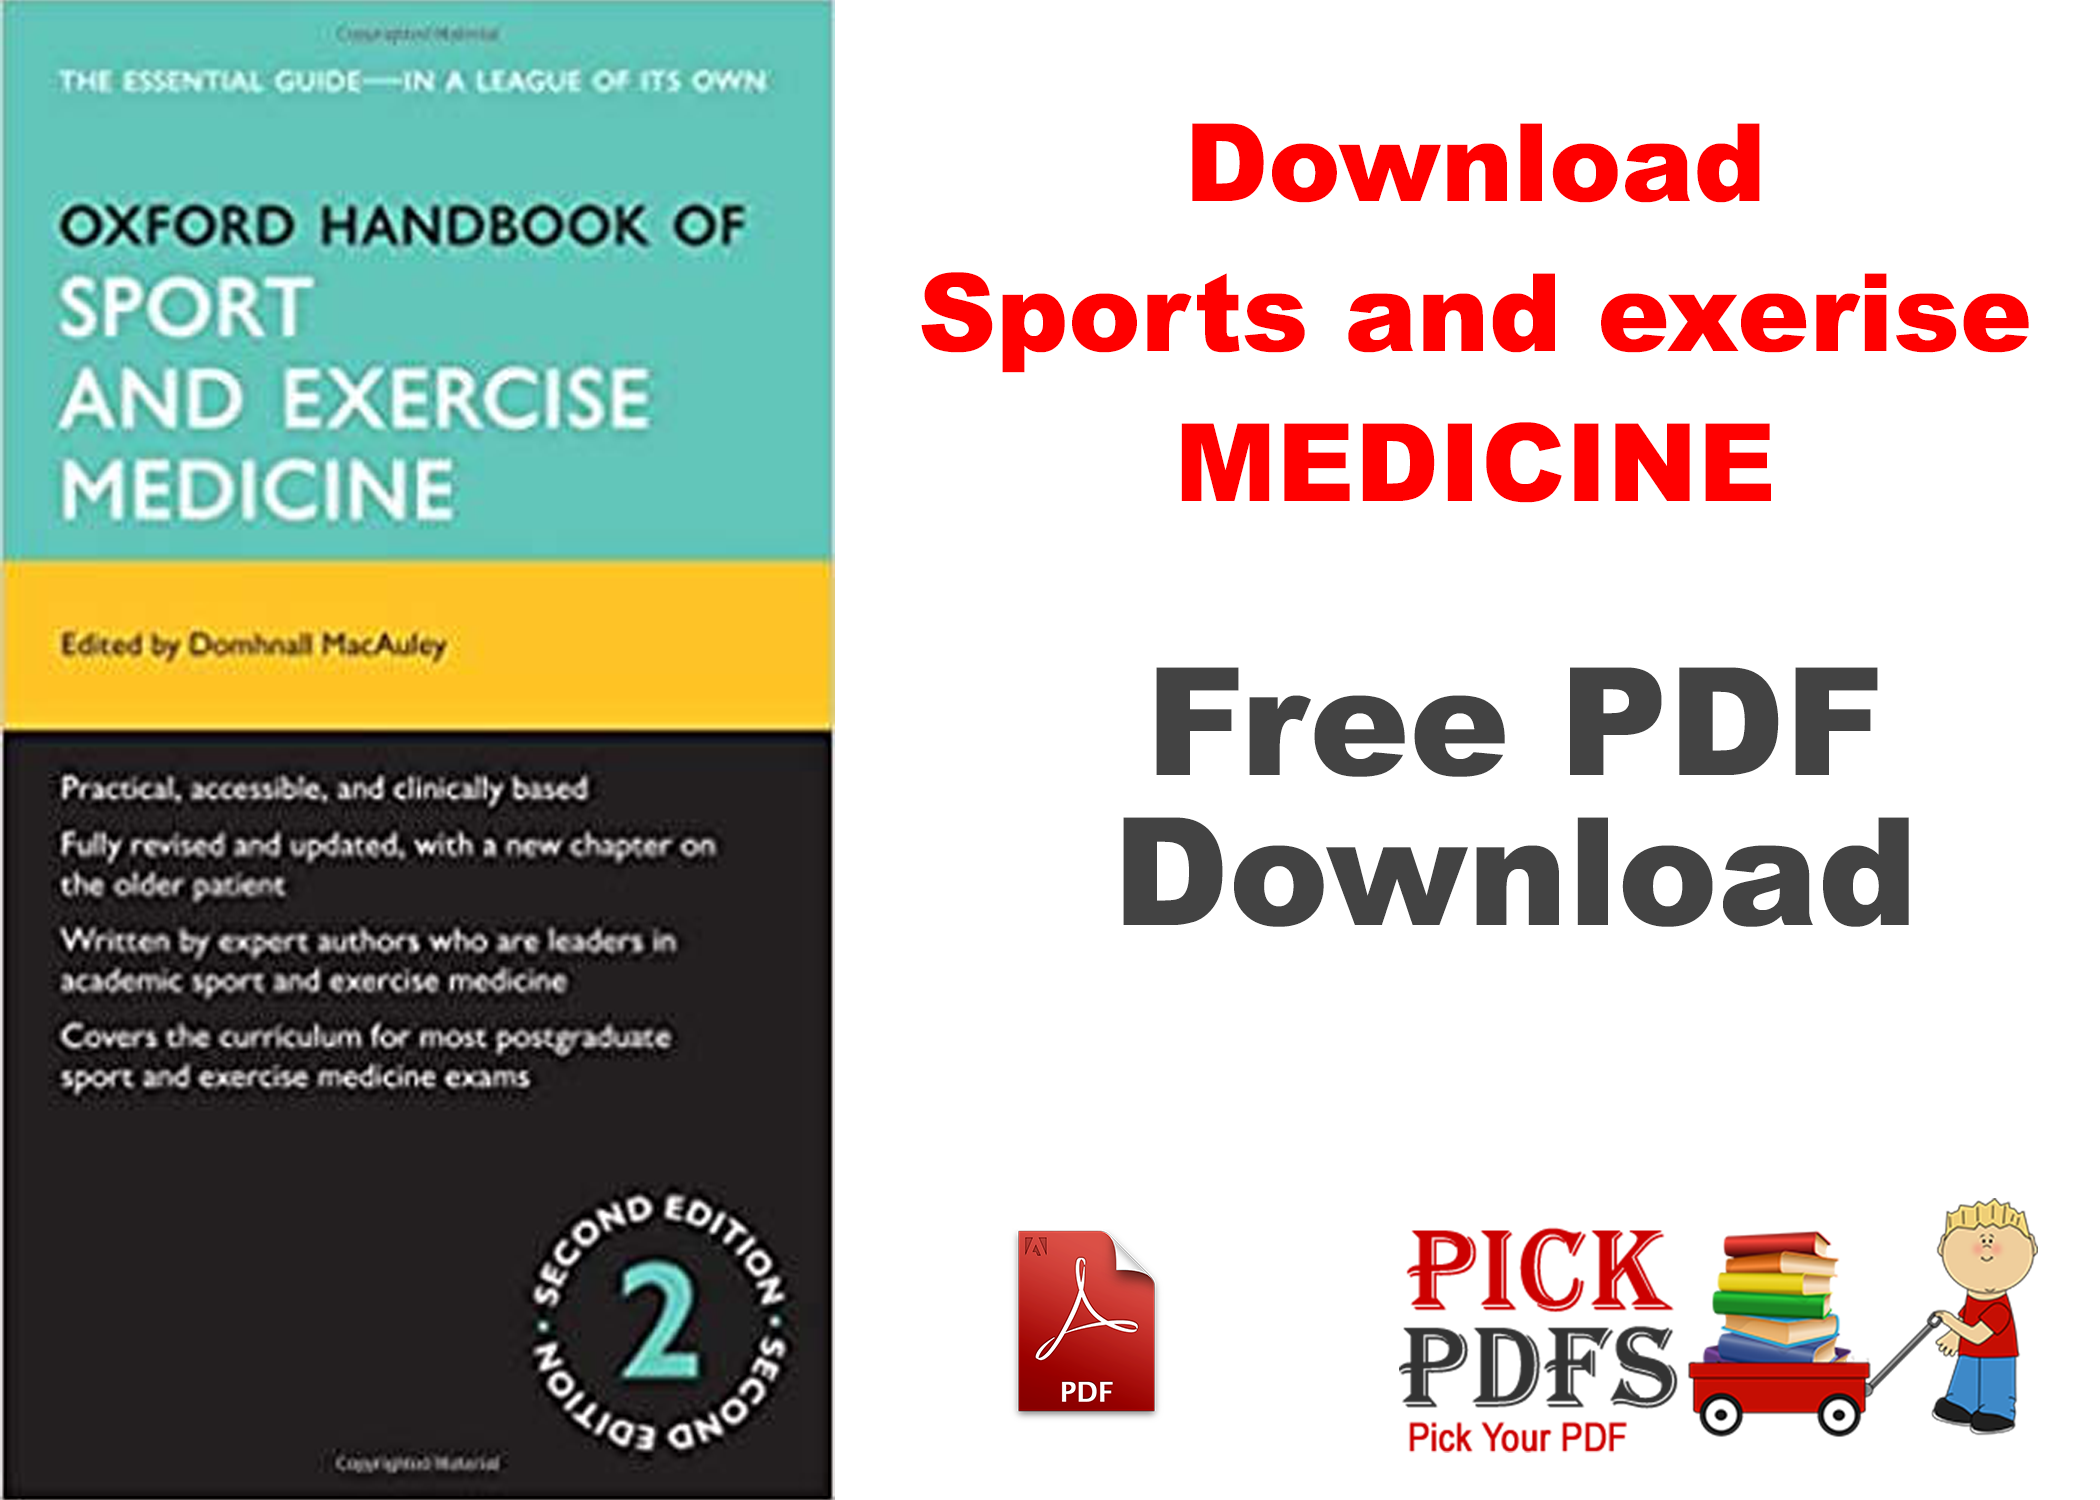 https://pickpdfs.com/oxford-handbook-of-sport-and-exercise-medicine-free-pdf-download-2nd-edition/